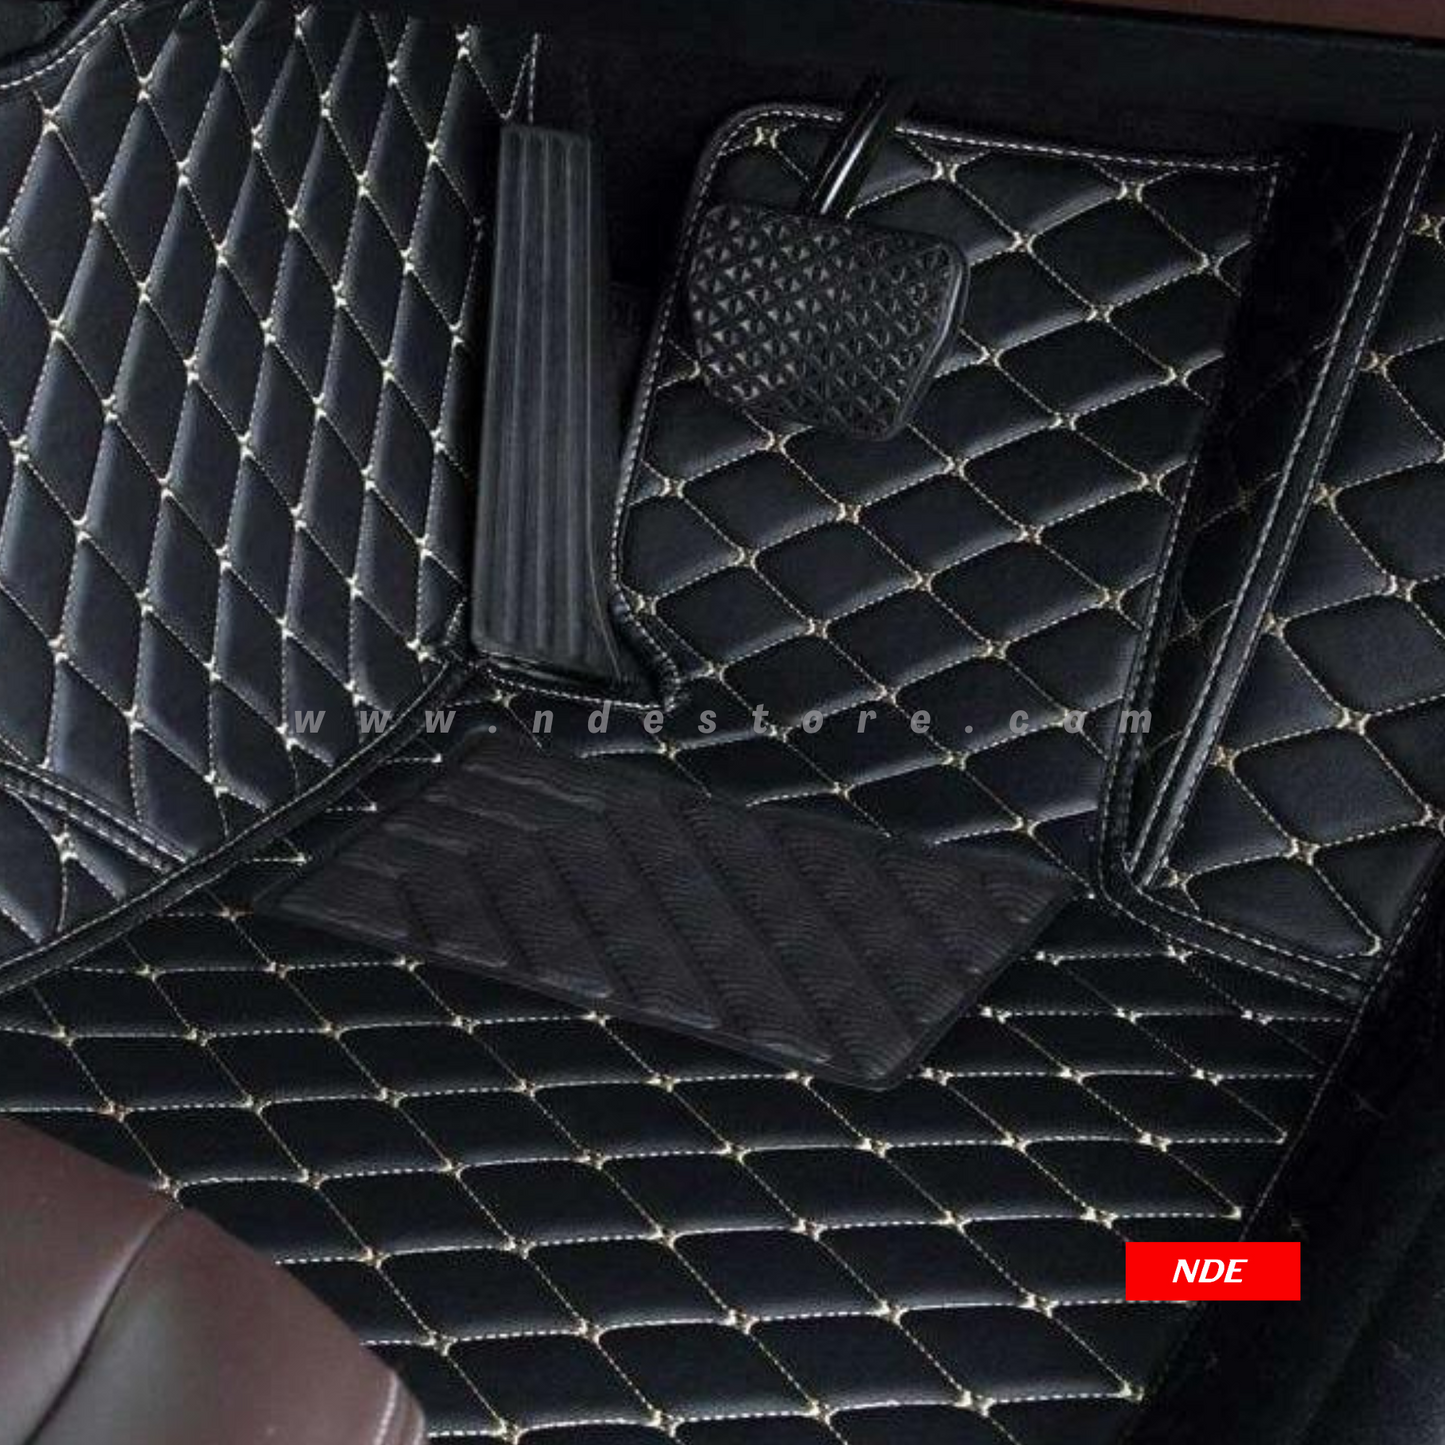 FLOOR MAT 7D STYLE FOR HAVAL H6